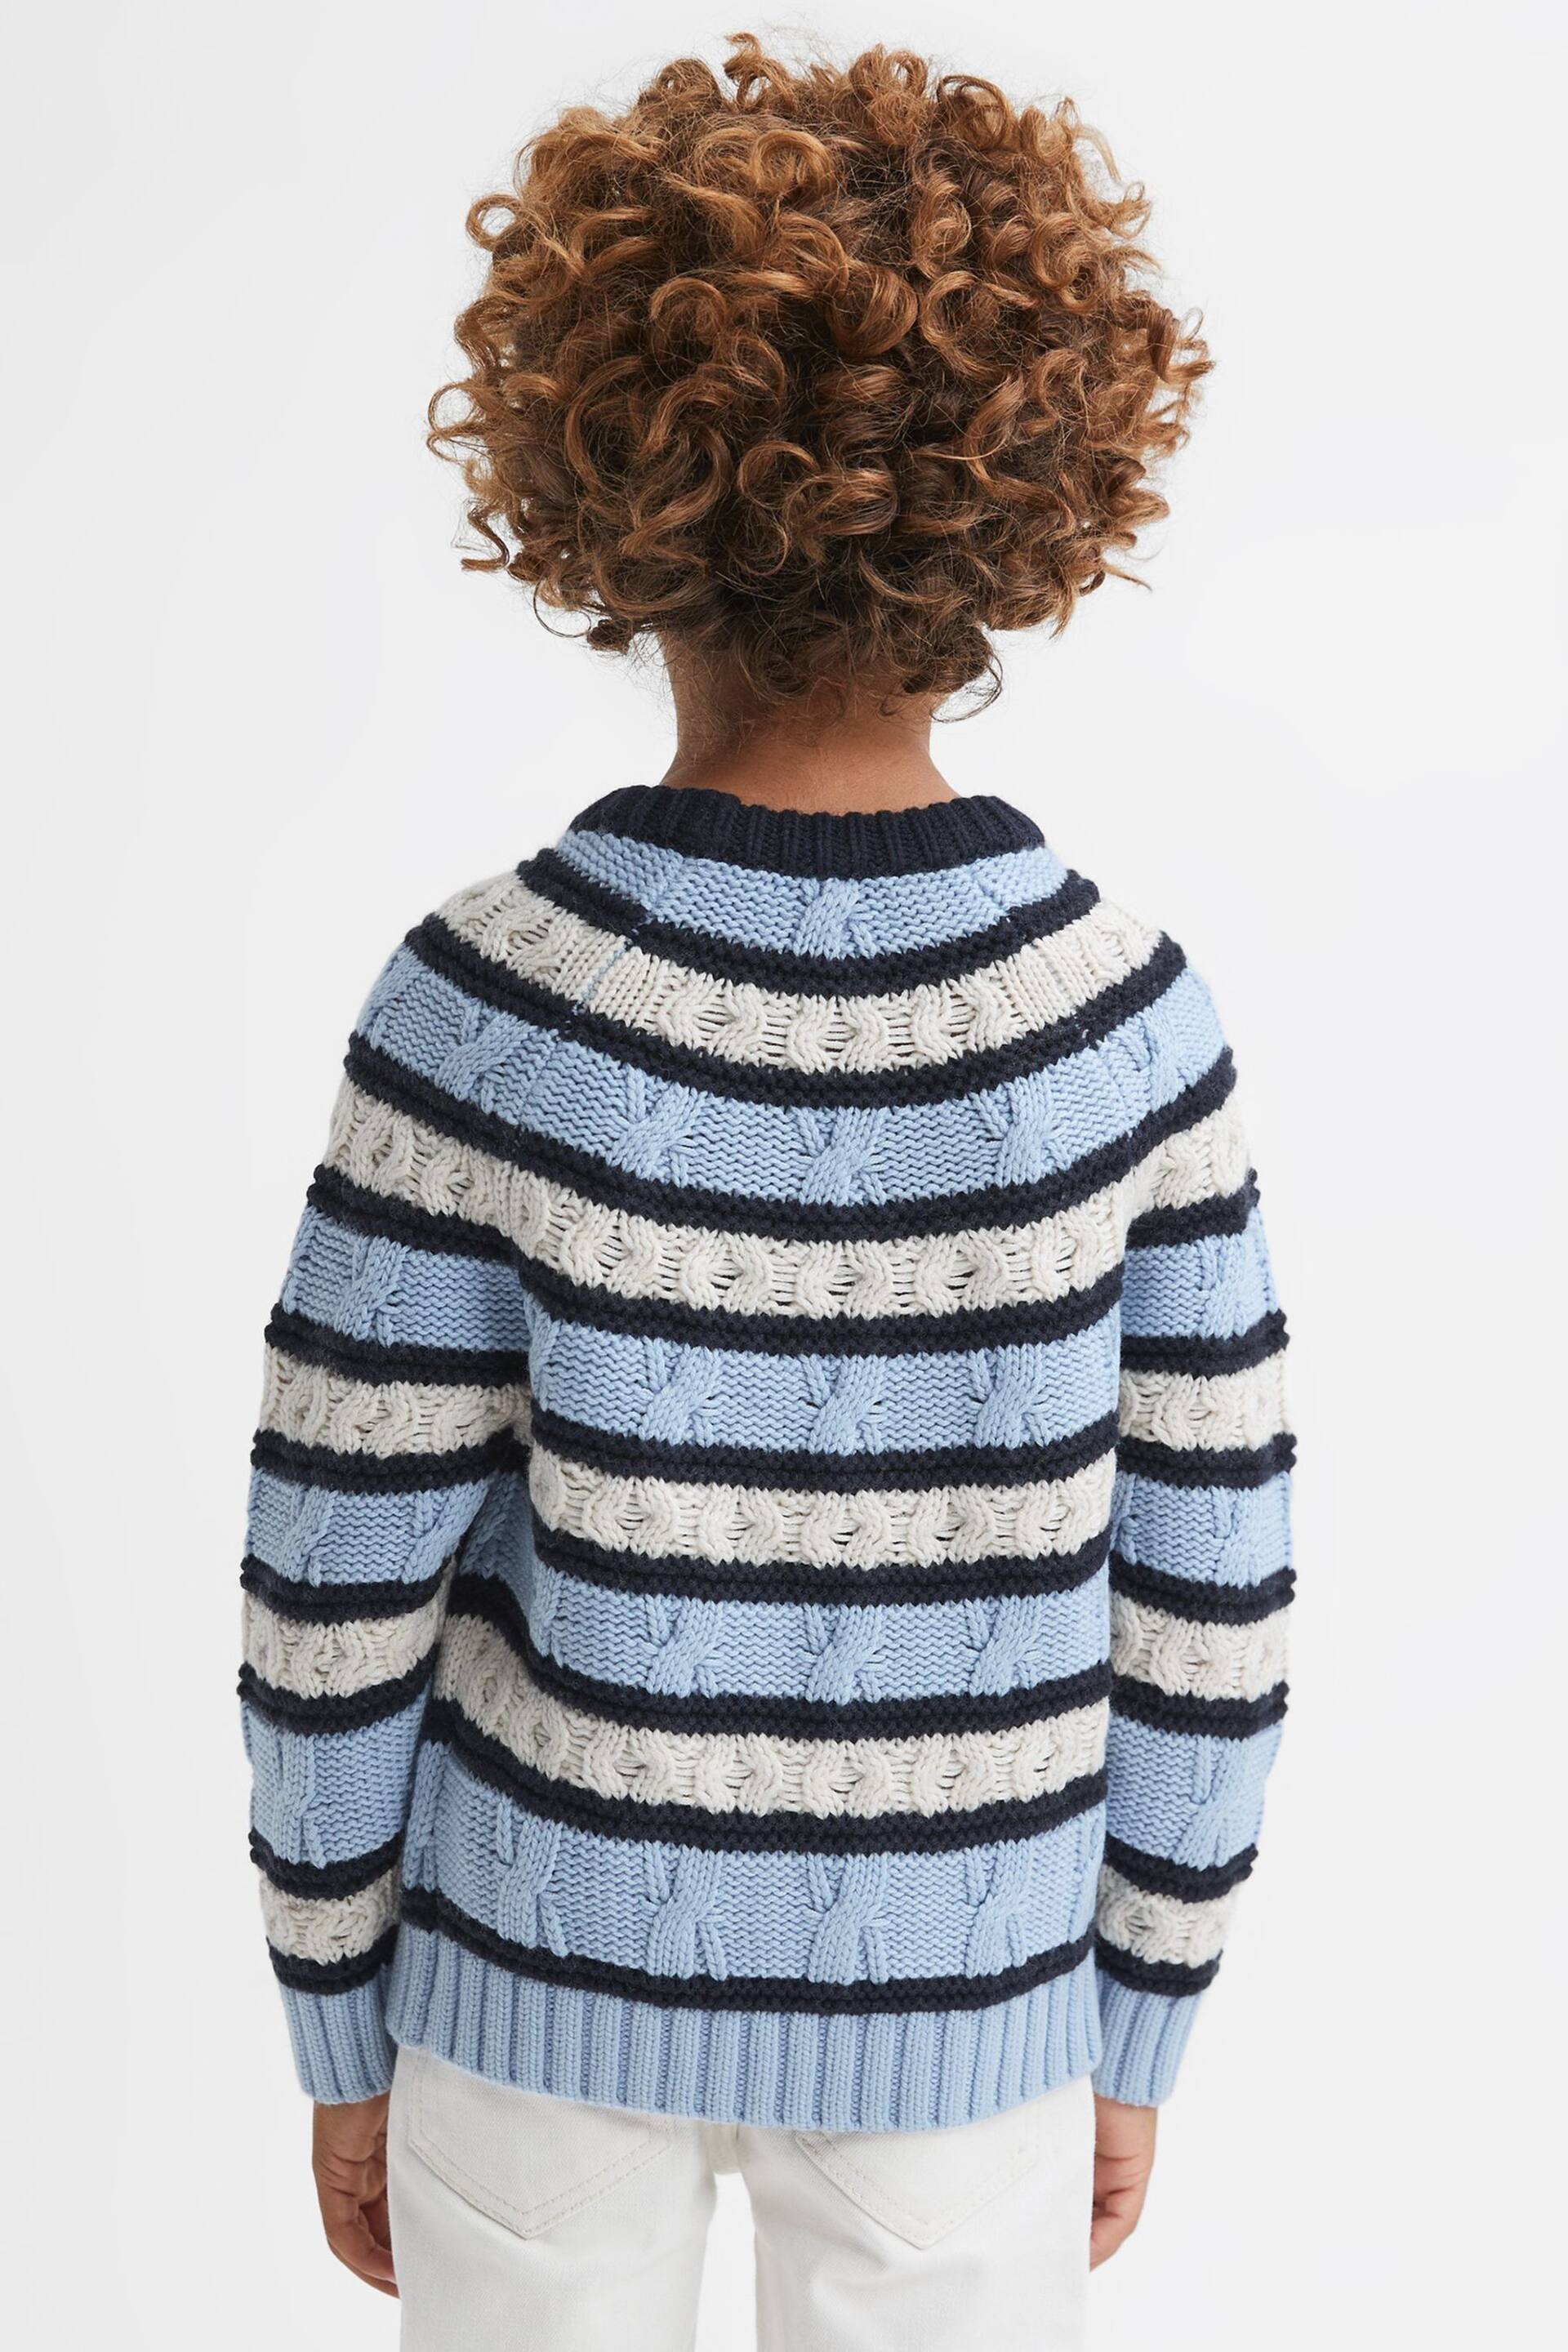 Reiss Ecru/Blue Littleton Junior Cable Knitted Striped Jumper - Image 4 of 5